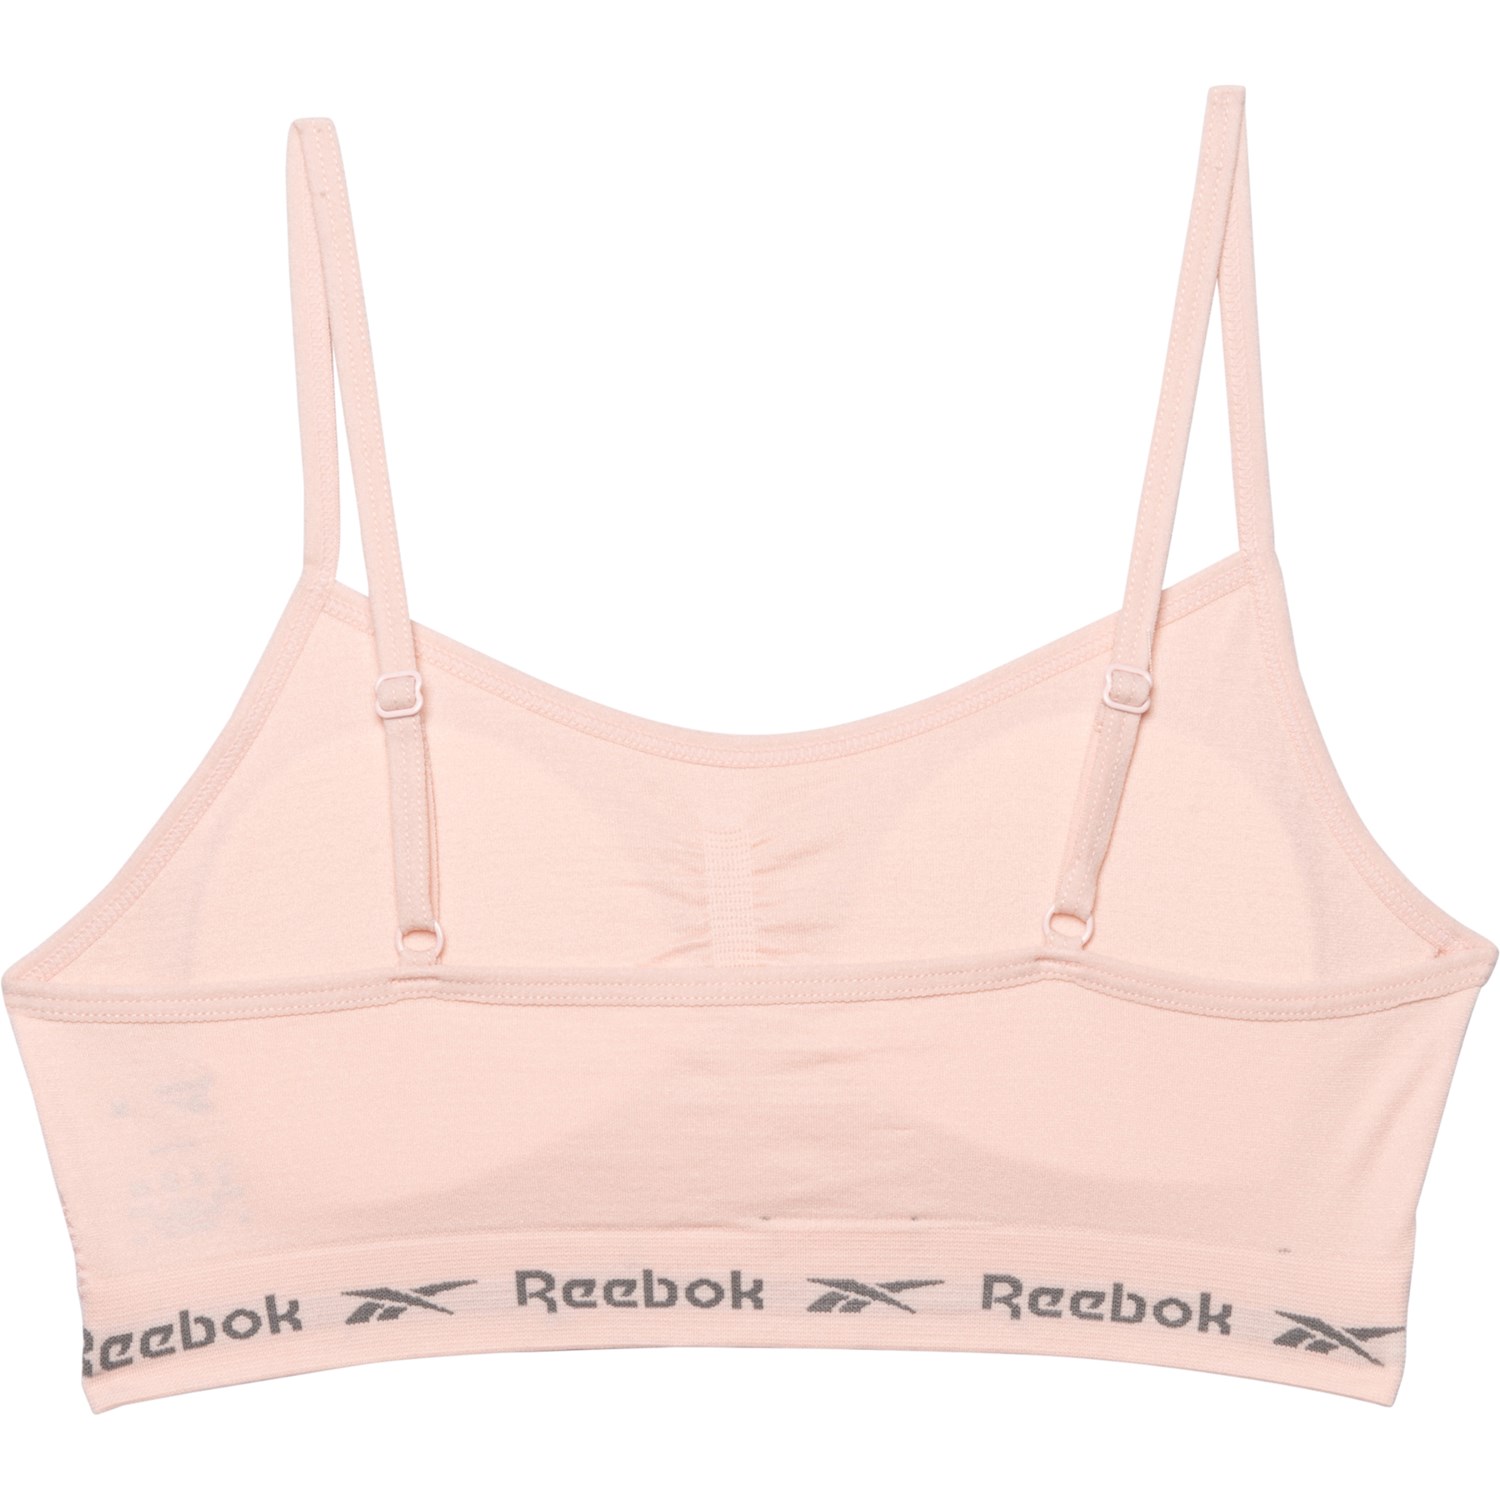 Reebok Seamless Ruched Bralette (For Big Girls) - Save 33%